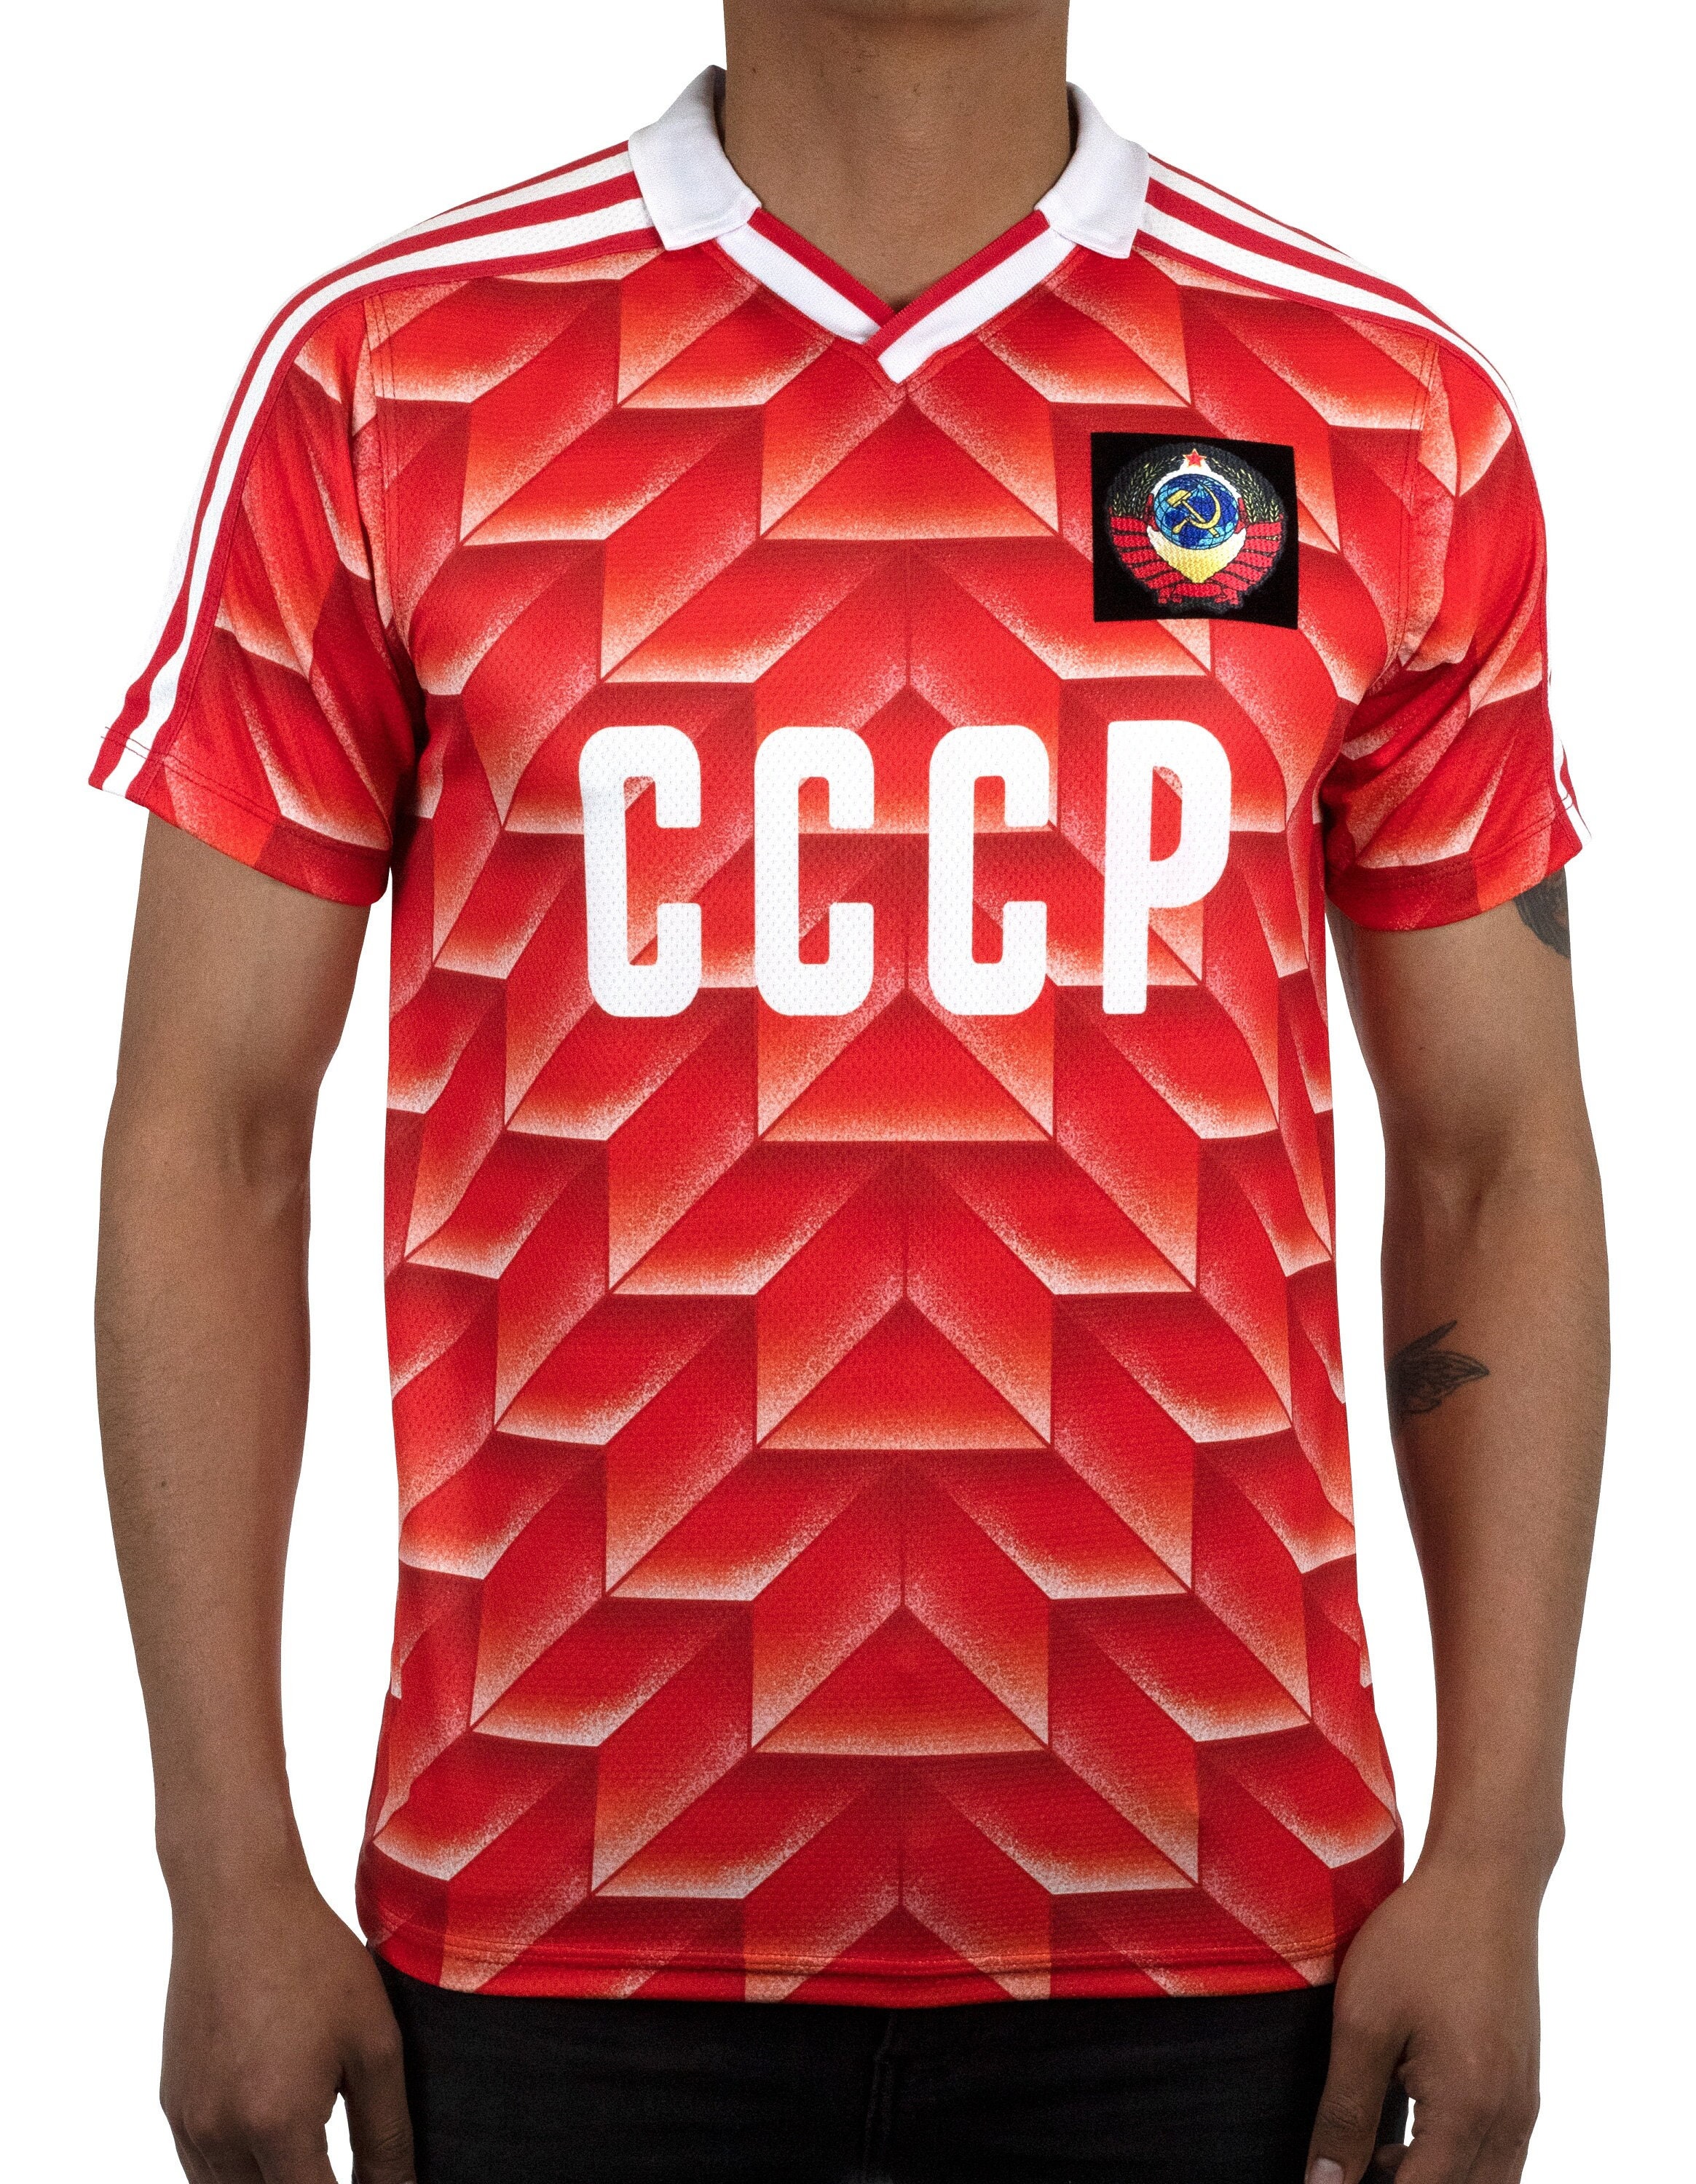 USSR Team 1988 Olympic Jersey